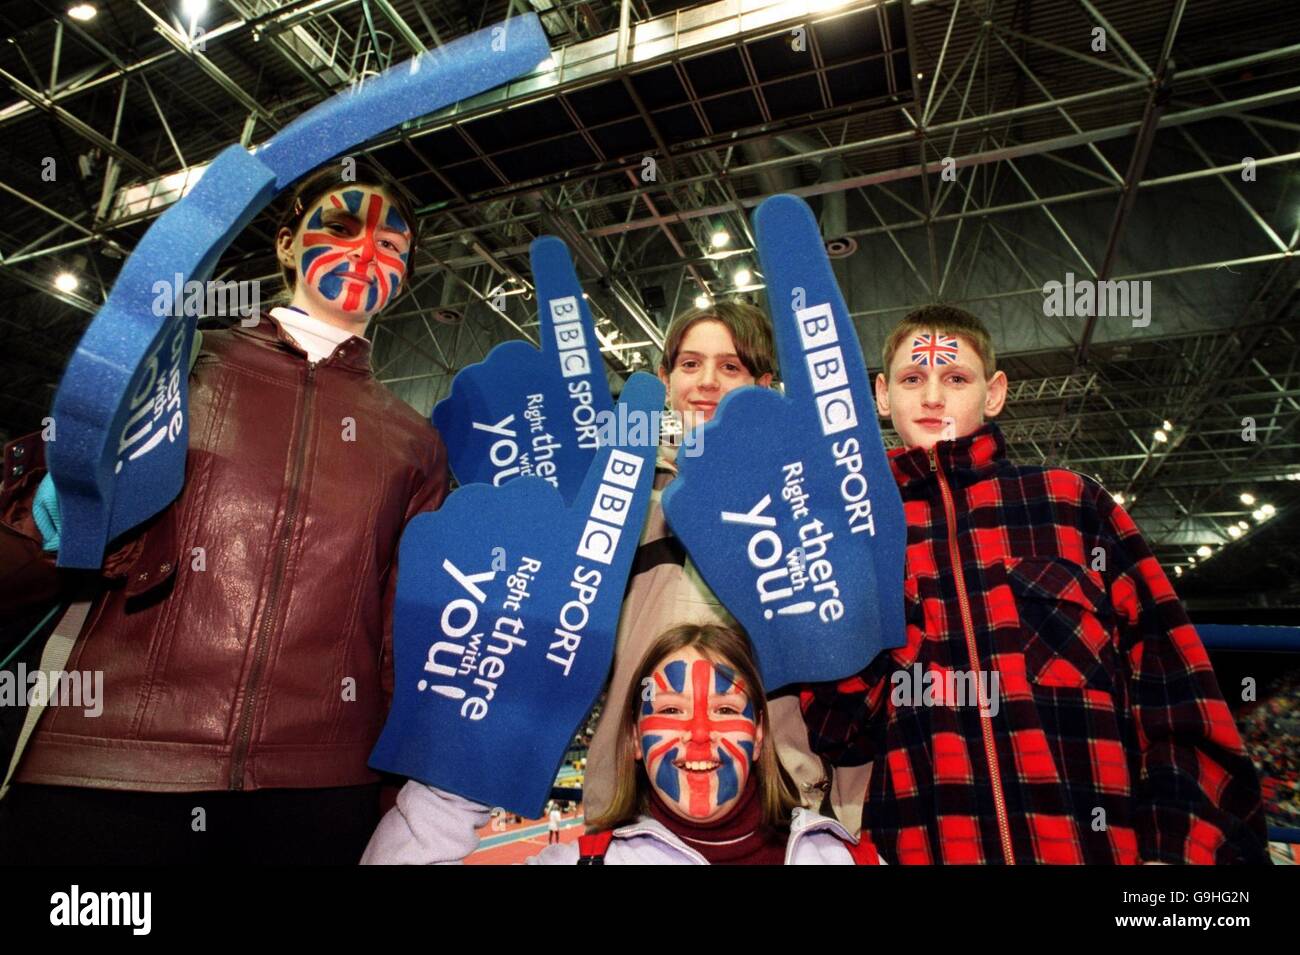 Athletics - Norwich Union Indoor Trials & AA Championships. Children with Union Jacks painted on their faces and BBC Sport foam hands Stock Photo